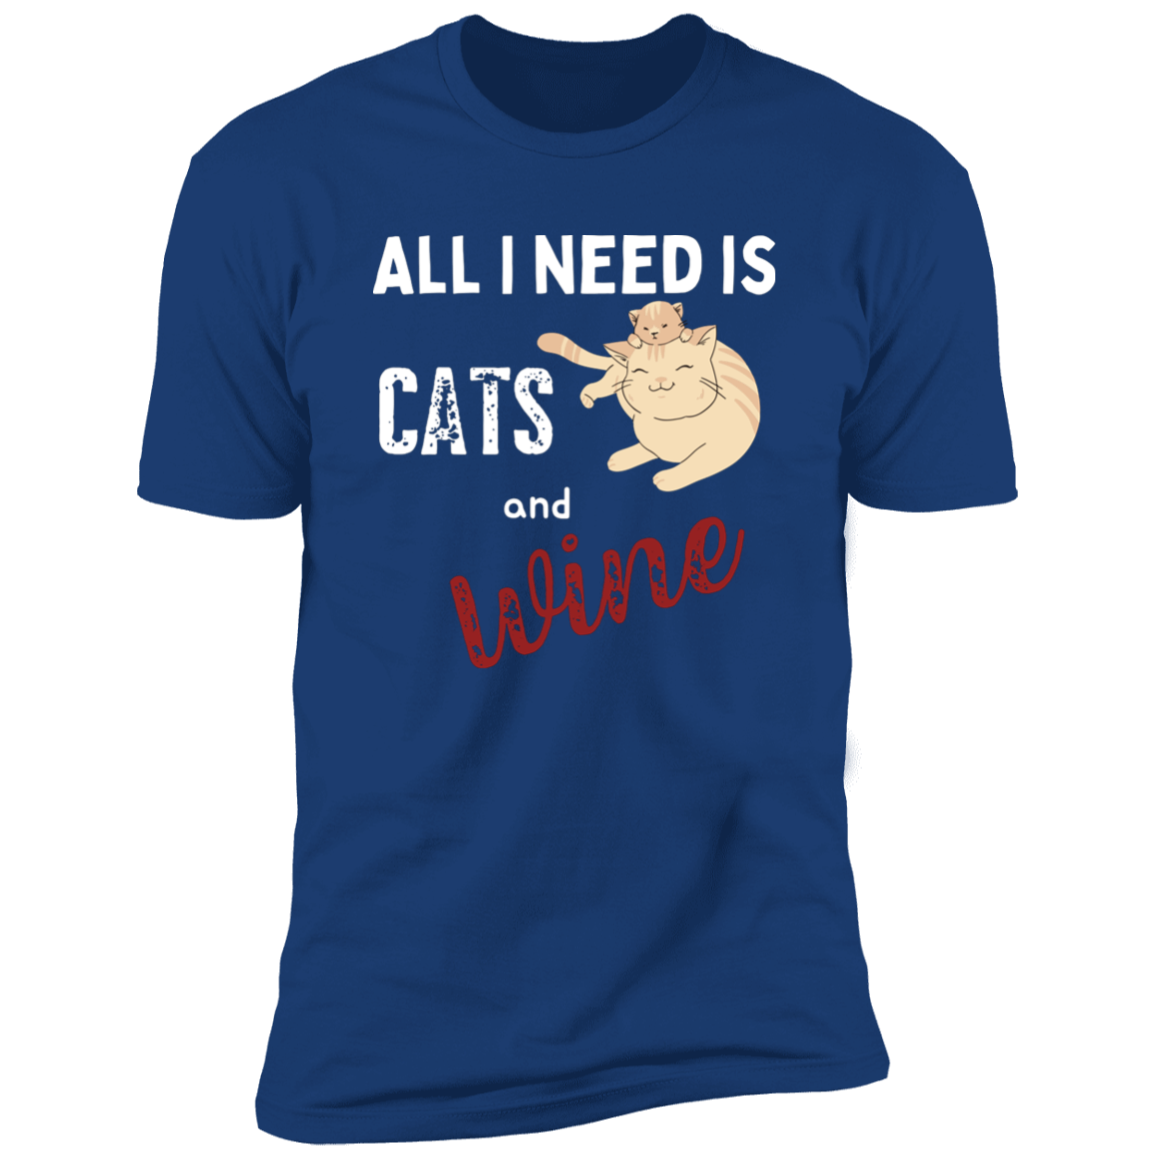 All I Need is Cats and Wine, Cat shirt for humas, in royal blue